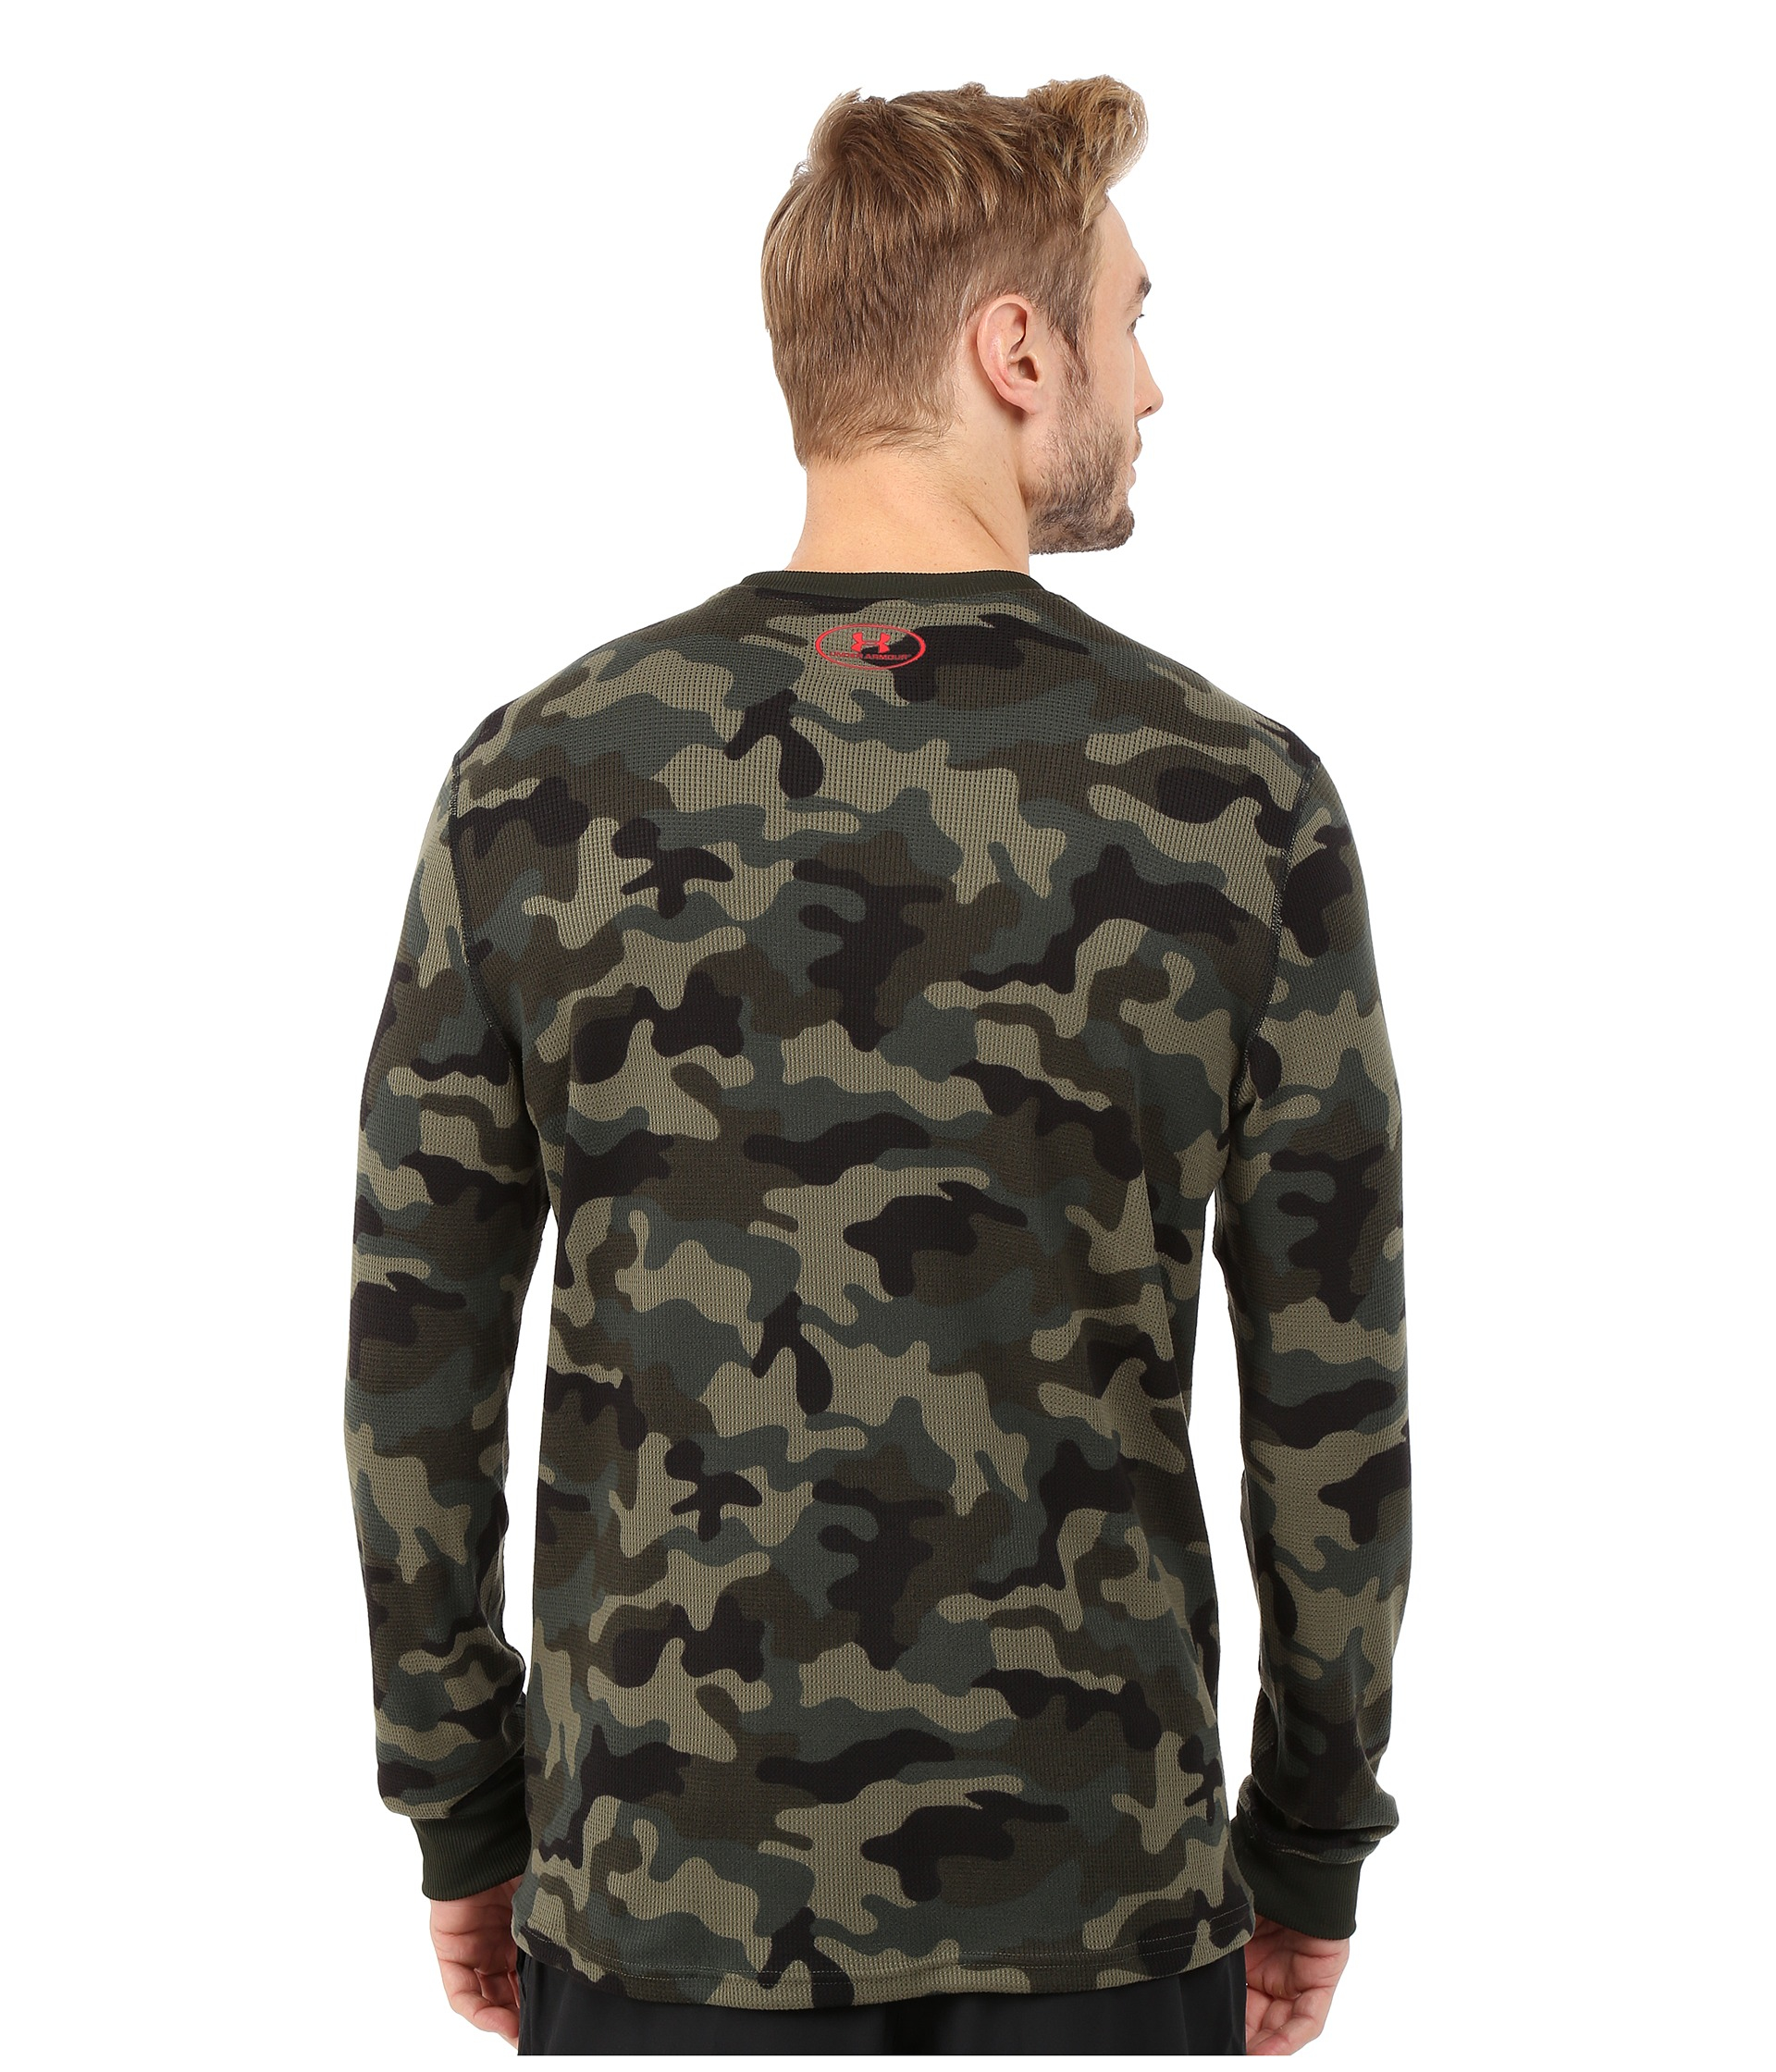 Lyst - Under Armour Ua Amplify Camo Thermal Crew in Green